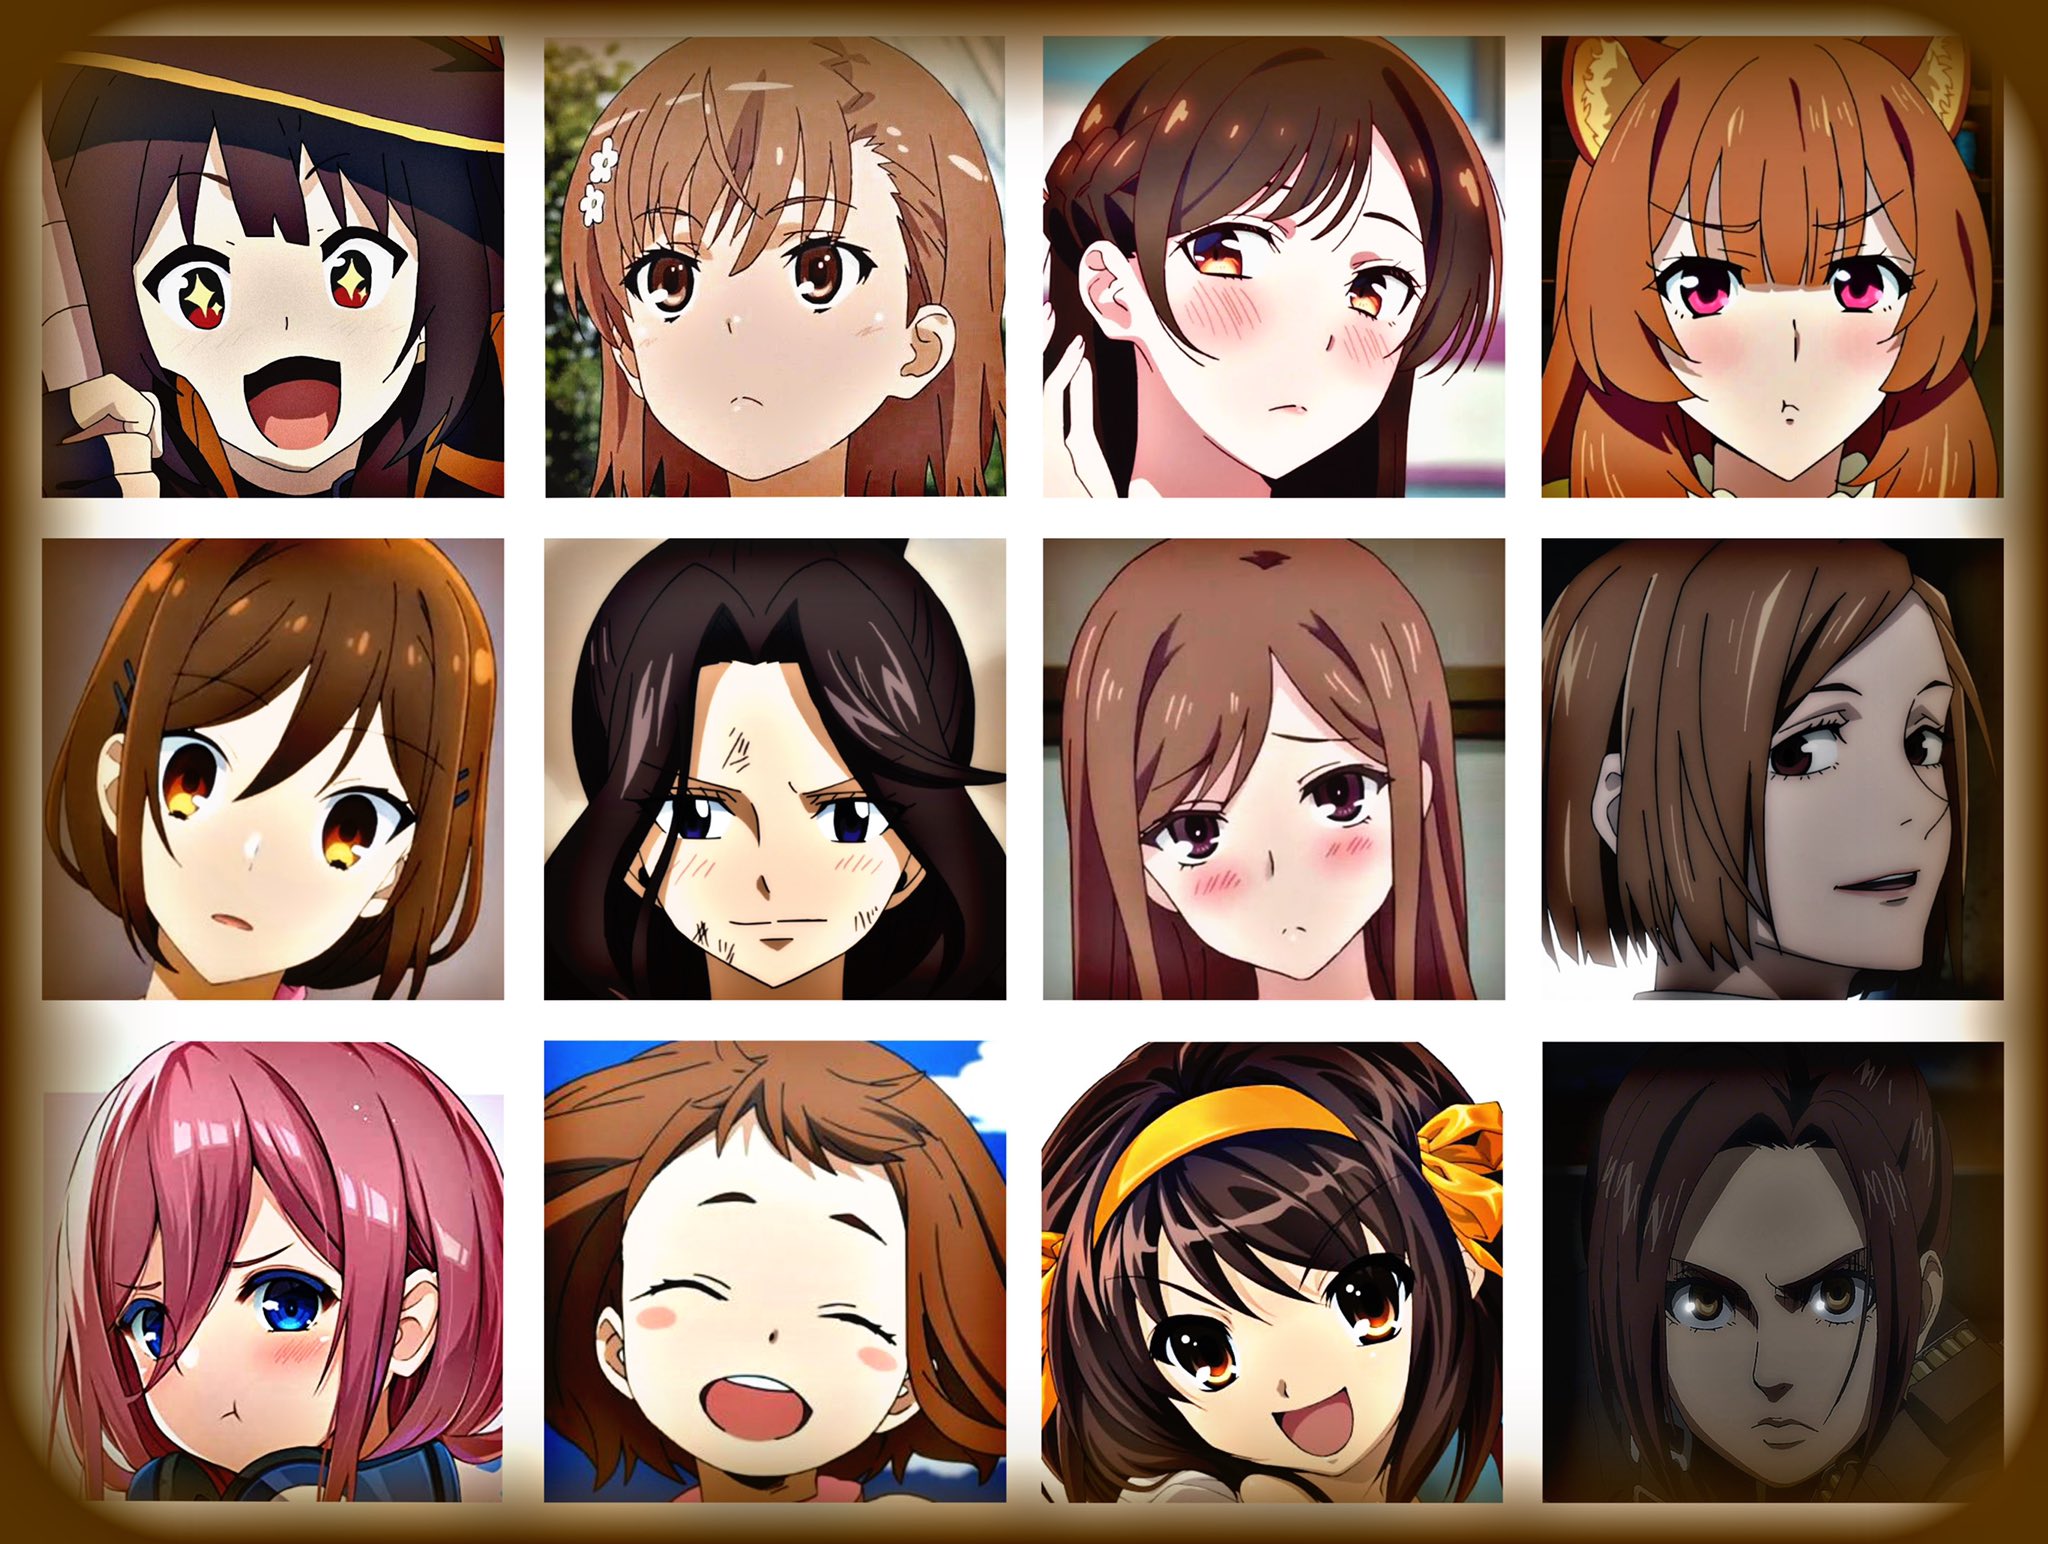 Premium Vector  A beautiful anime girl brown hair with green eyes